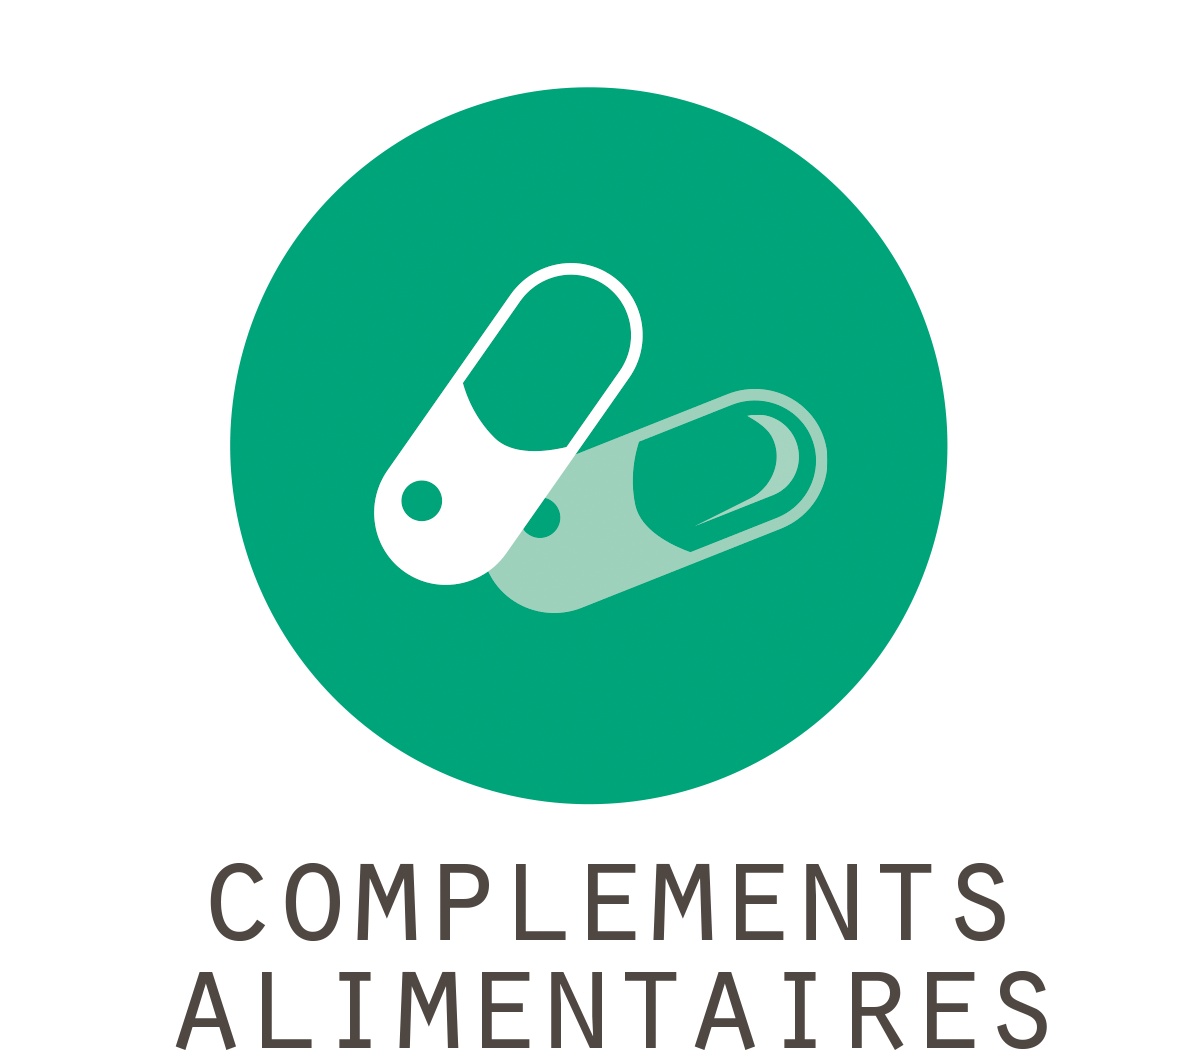 Complements alimentaires